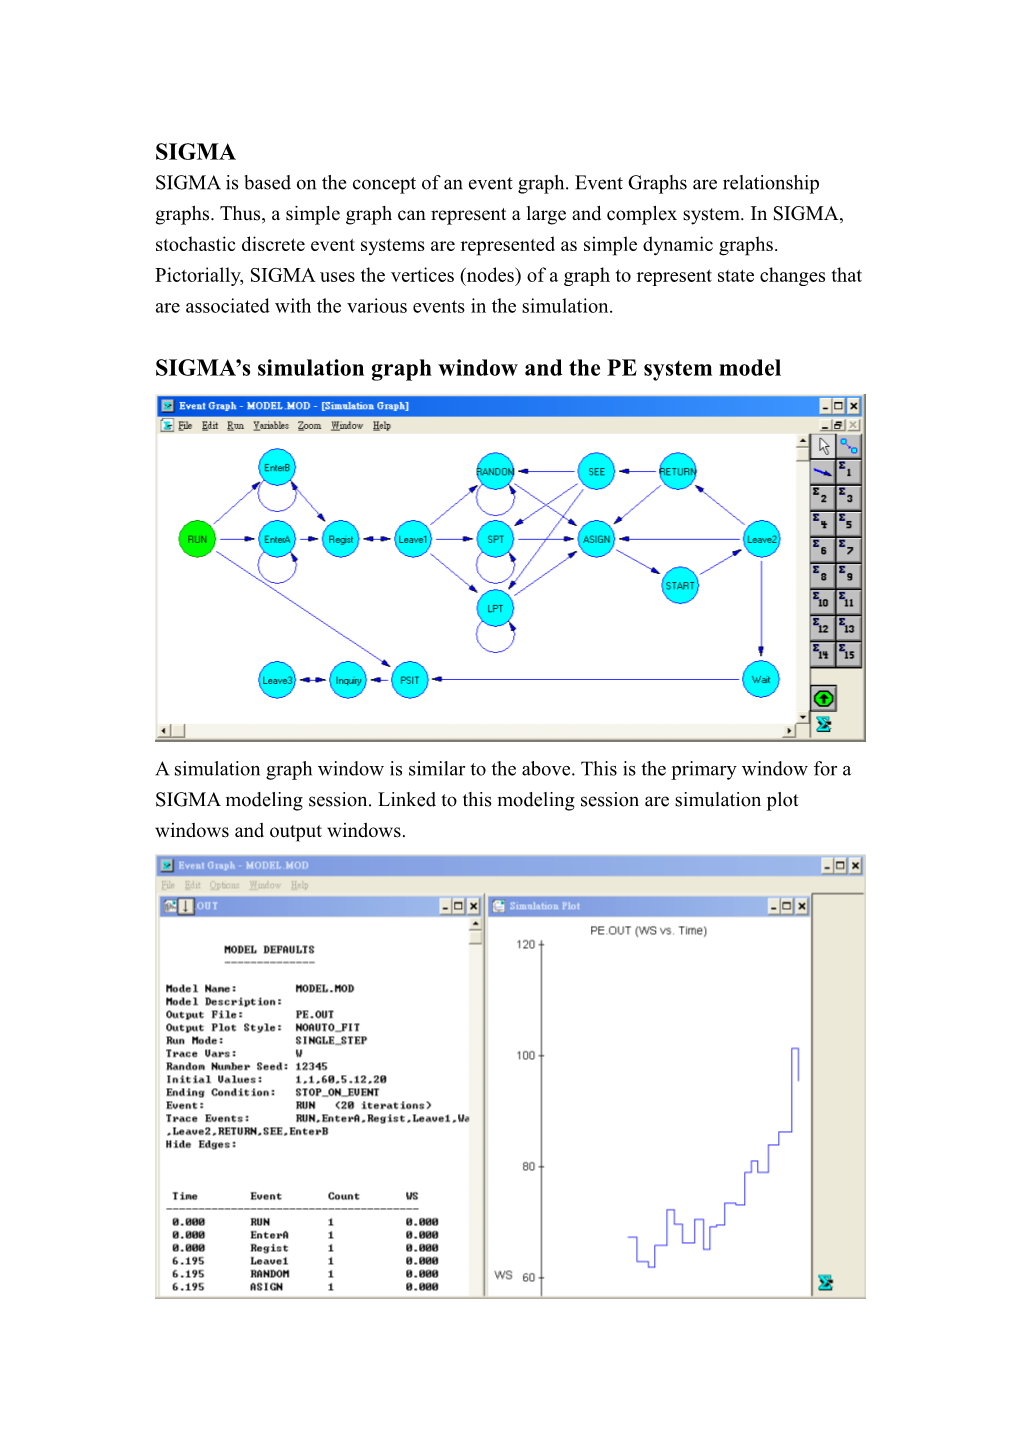 SIGMA S Simulation Graph Window and the PE System Model